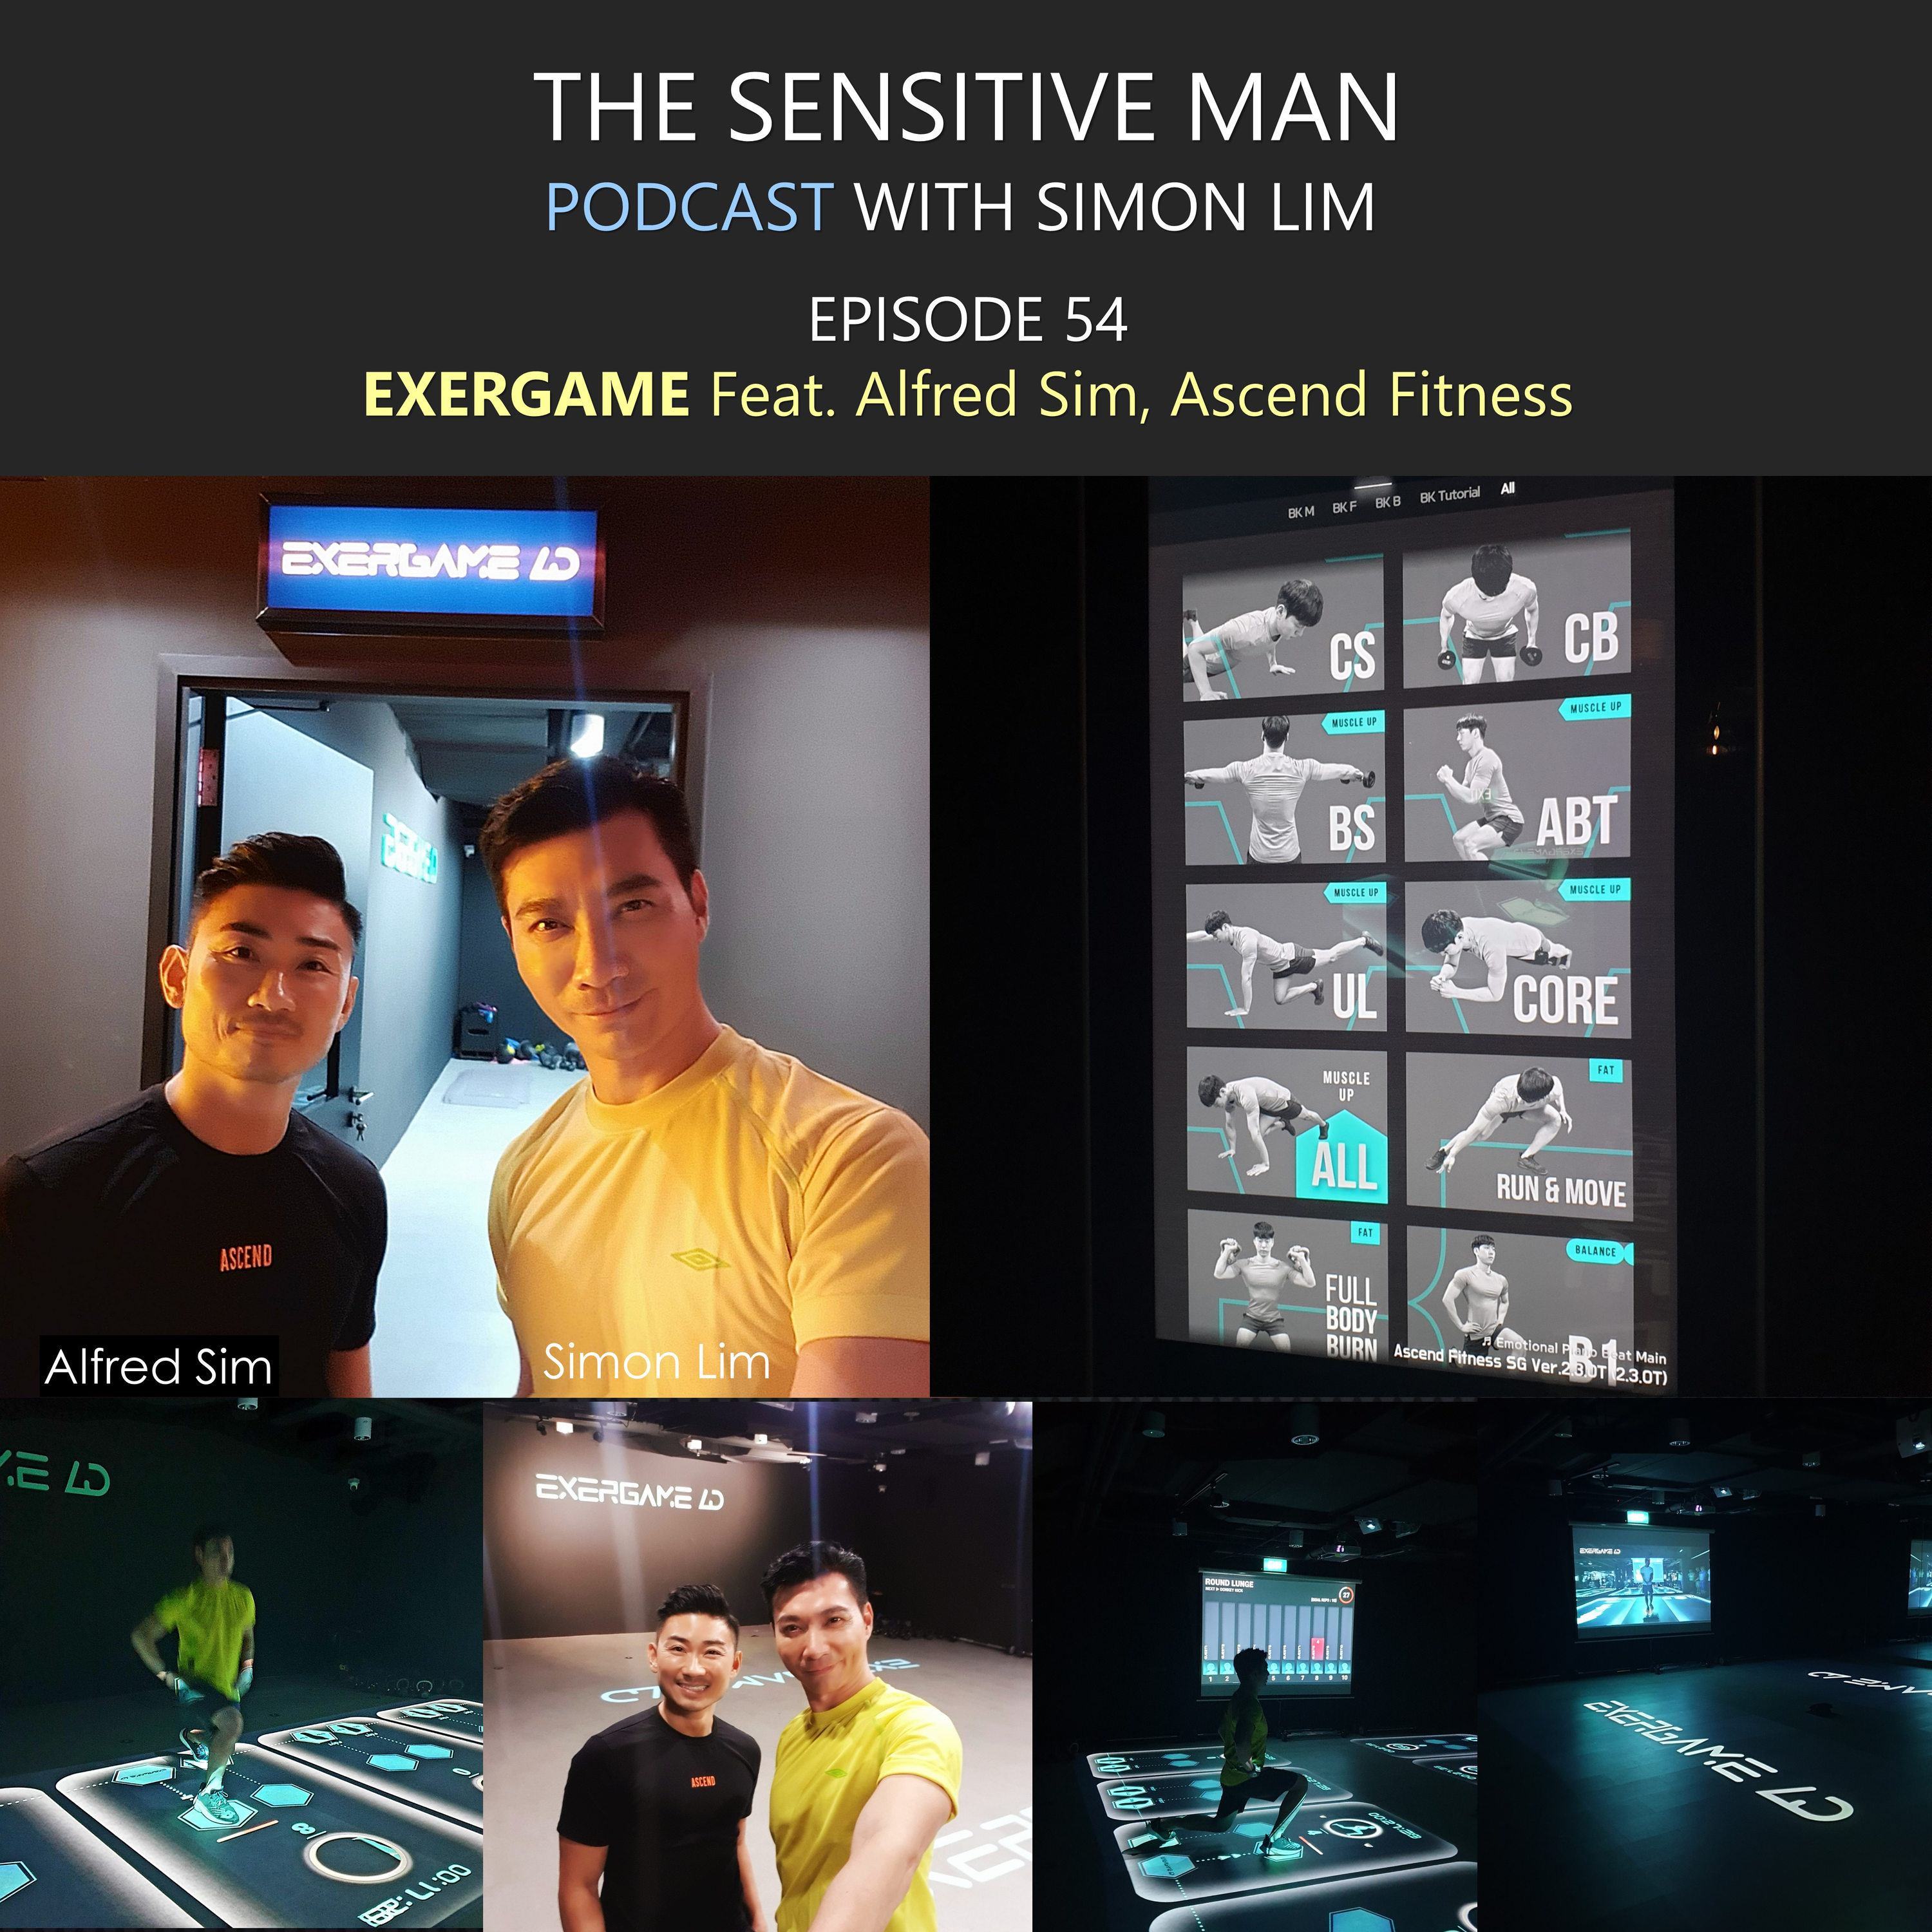 EXERGAME 4D  Feat. Alfred Sim, Ascend Fitness